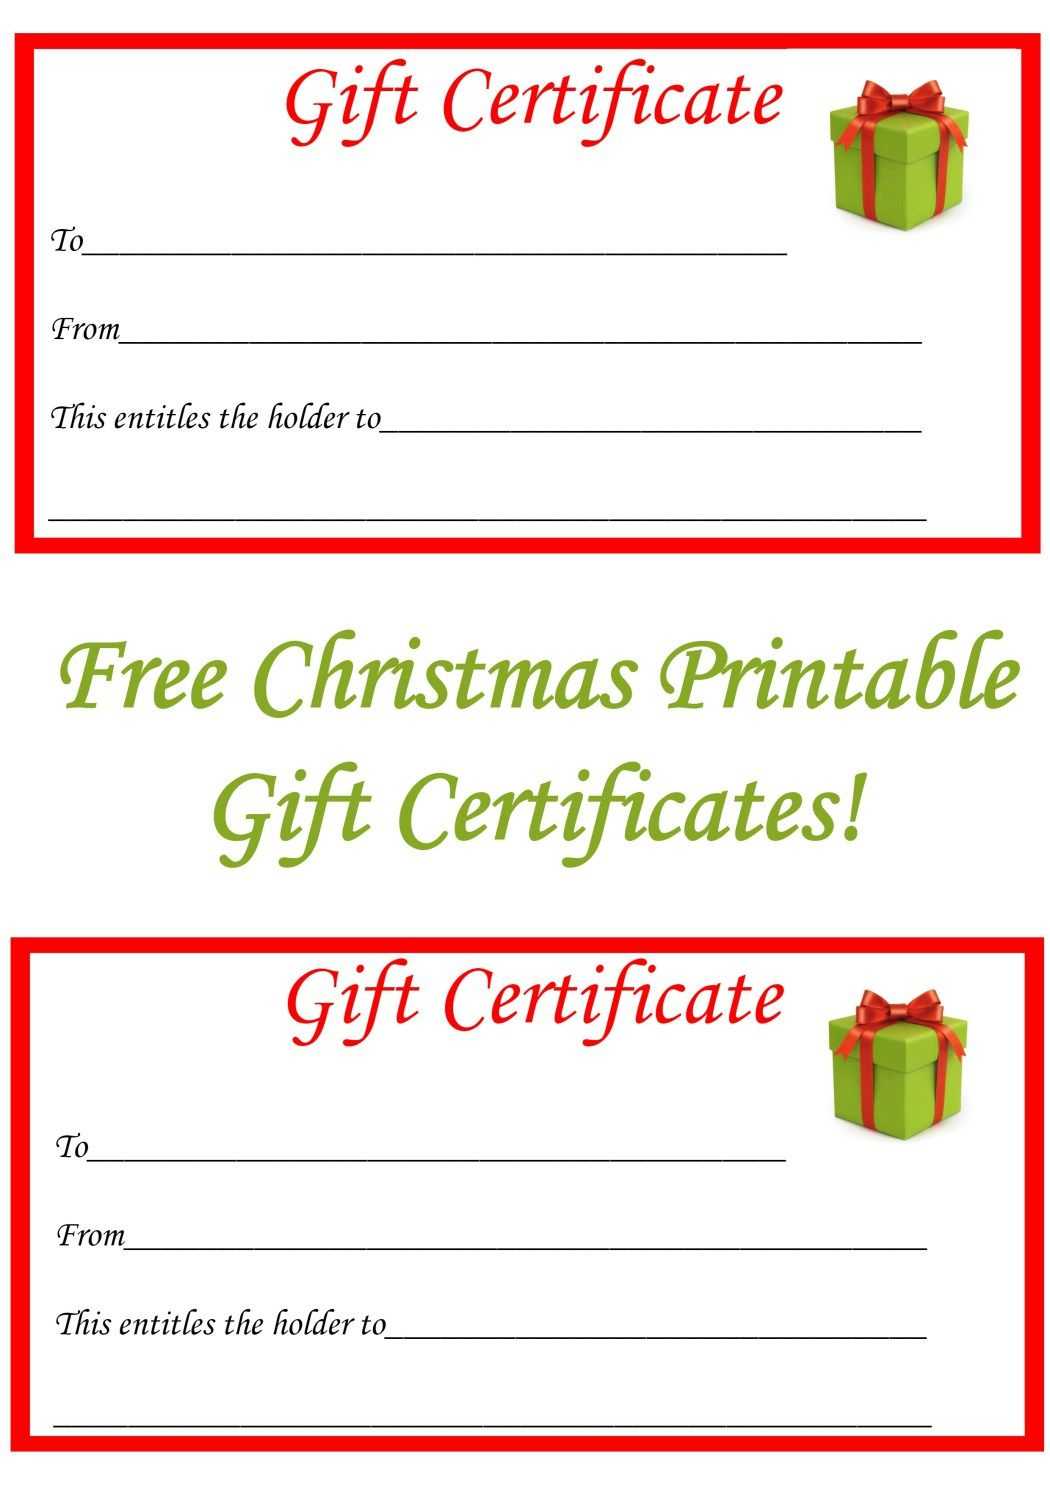 010 Gift Certificate Template Pages Archaicawful Ideas For Golf Gift Certificate Template